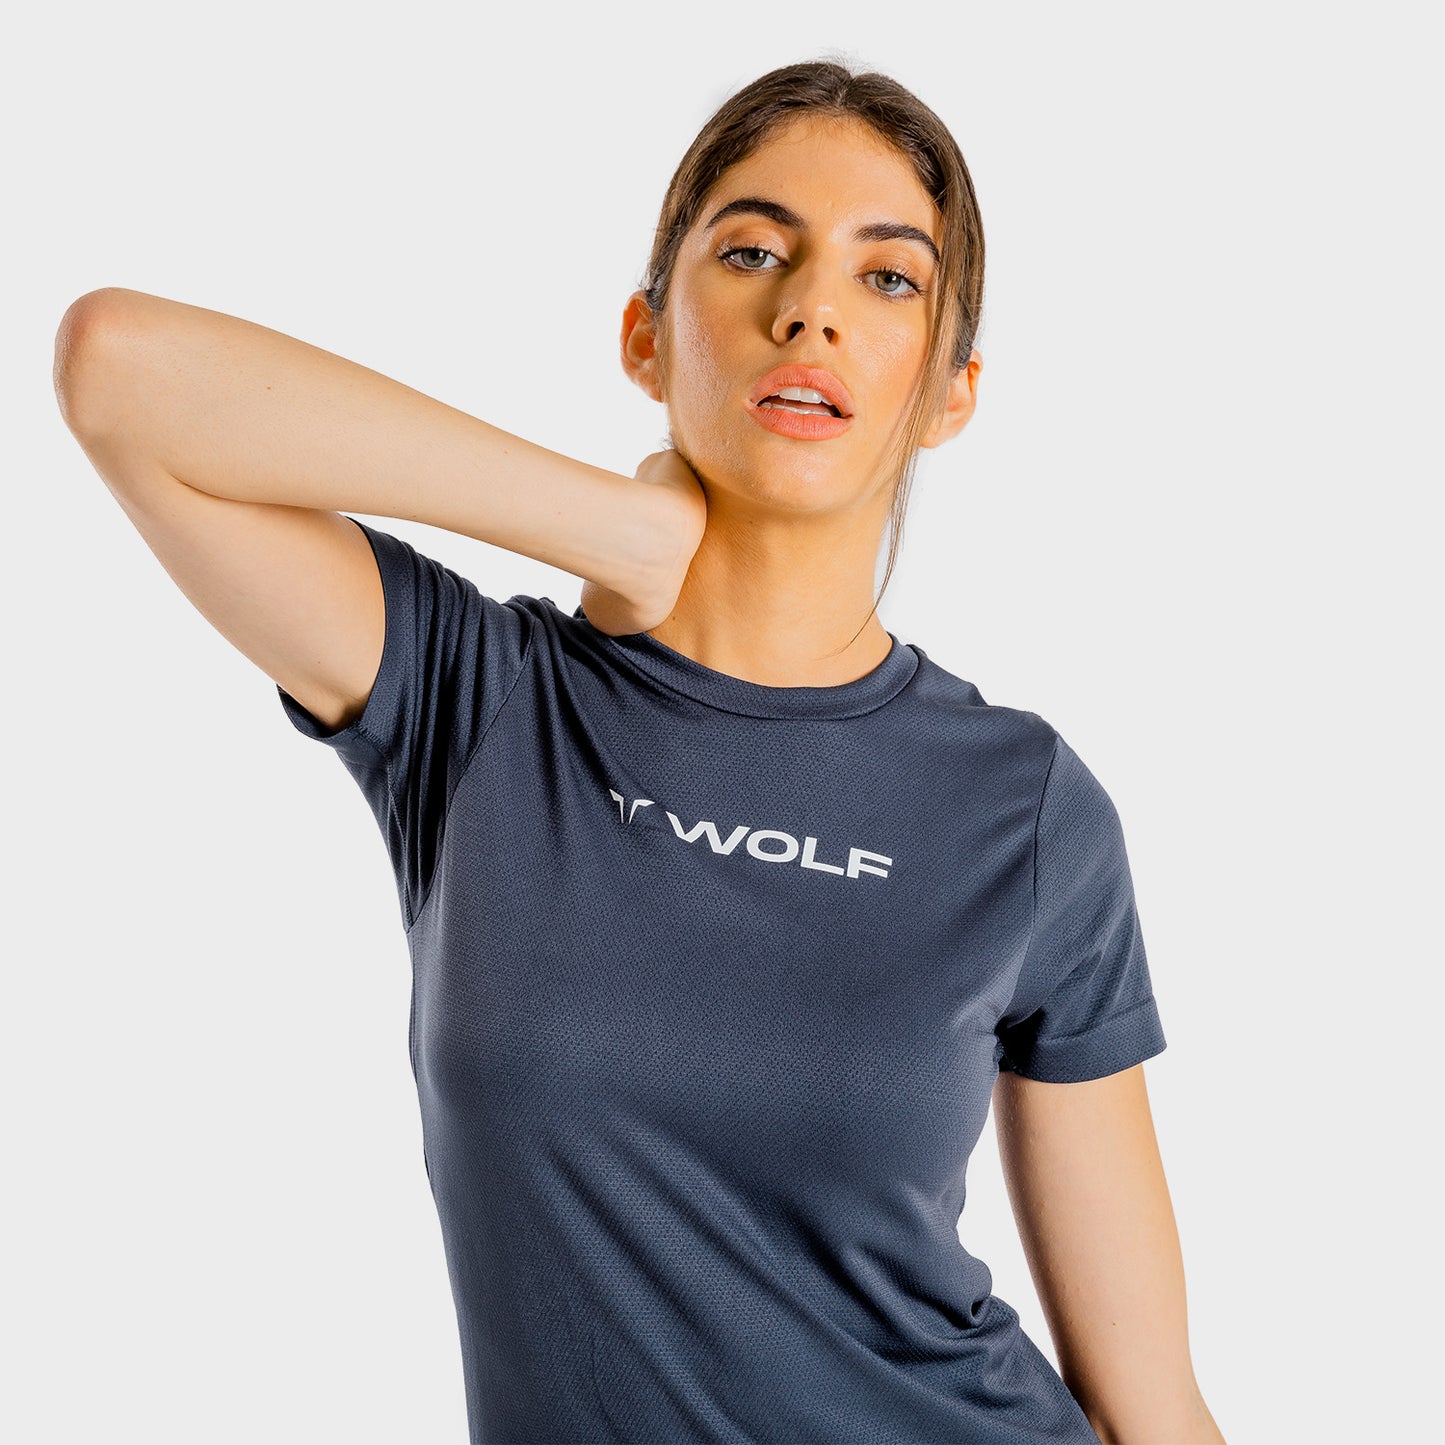 squatwolf-gym-t-shirts-for-women-primal-tee-navy-workout-clothes